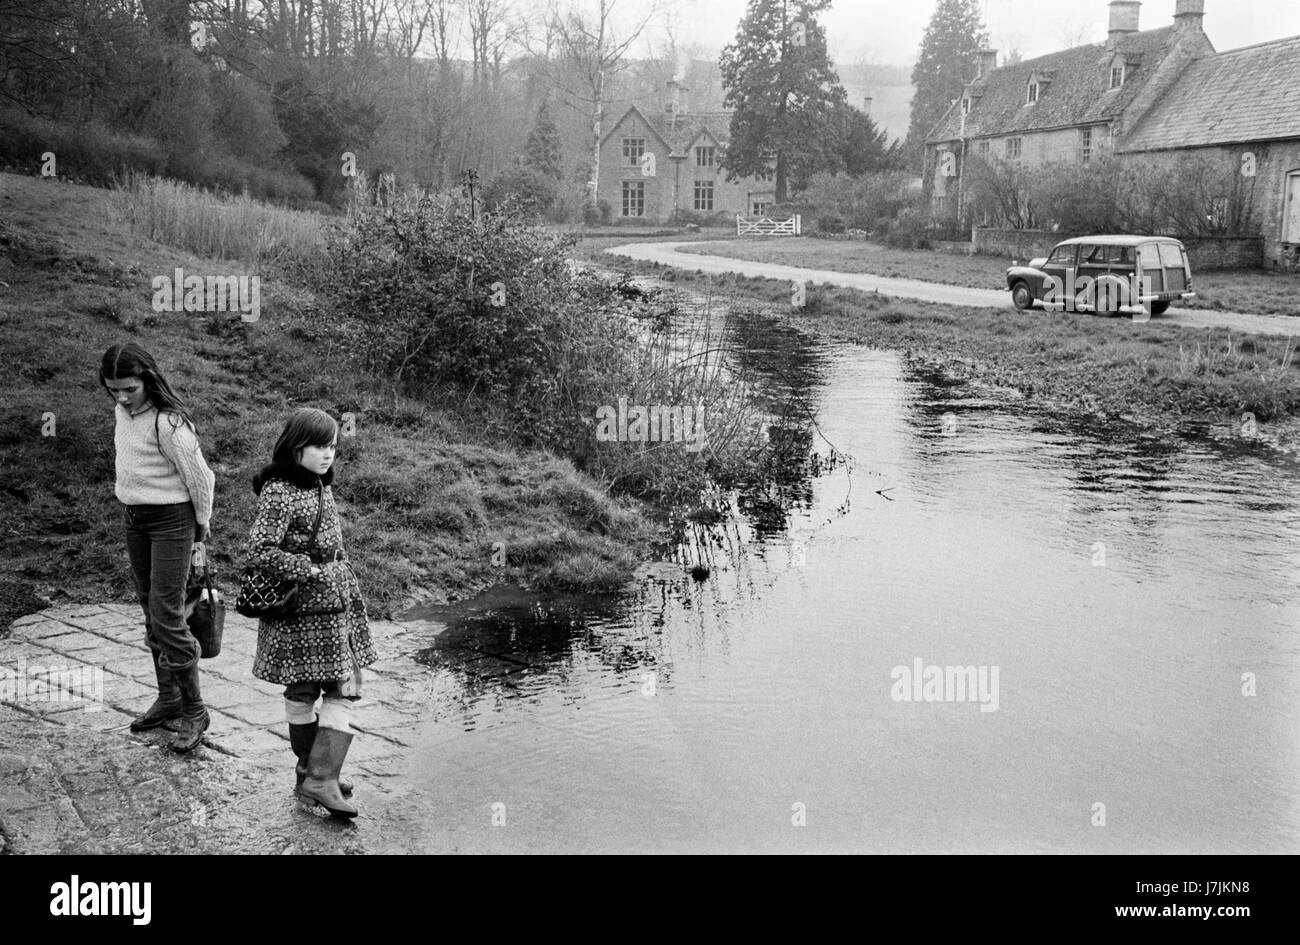 1970s Britain UK. River Eye running through village. Country life Village life style The Cotswolds, Lower Slaughter, Gloucestershire  1975 Lower and Upper Slaughter are twin villages on the River Eye and are know as The Slaughters. HOMER SYKES HOMER SYKES Stock Photo